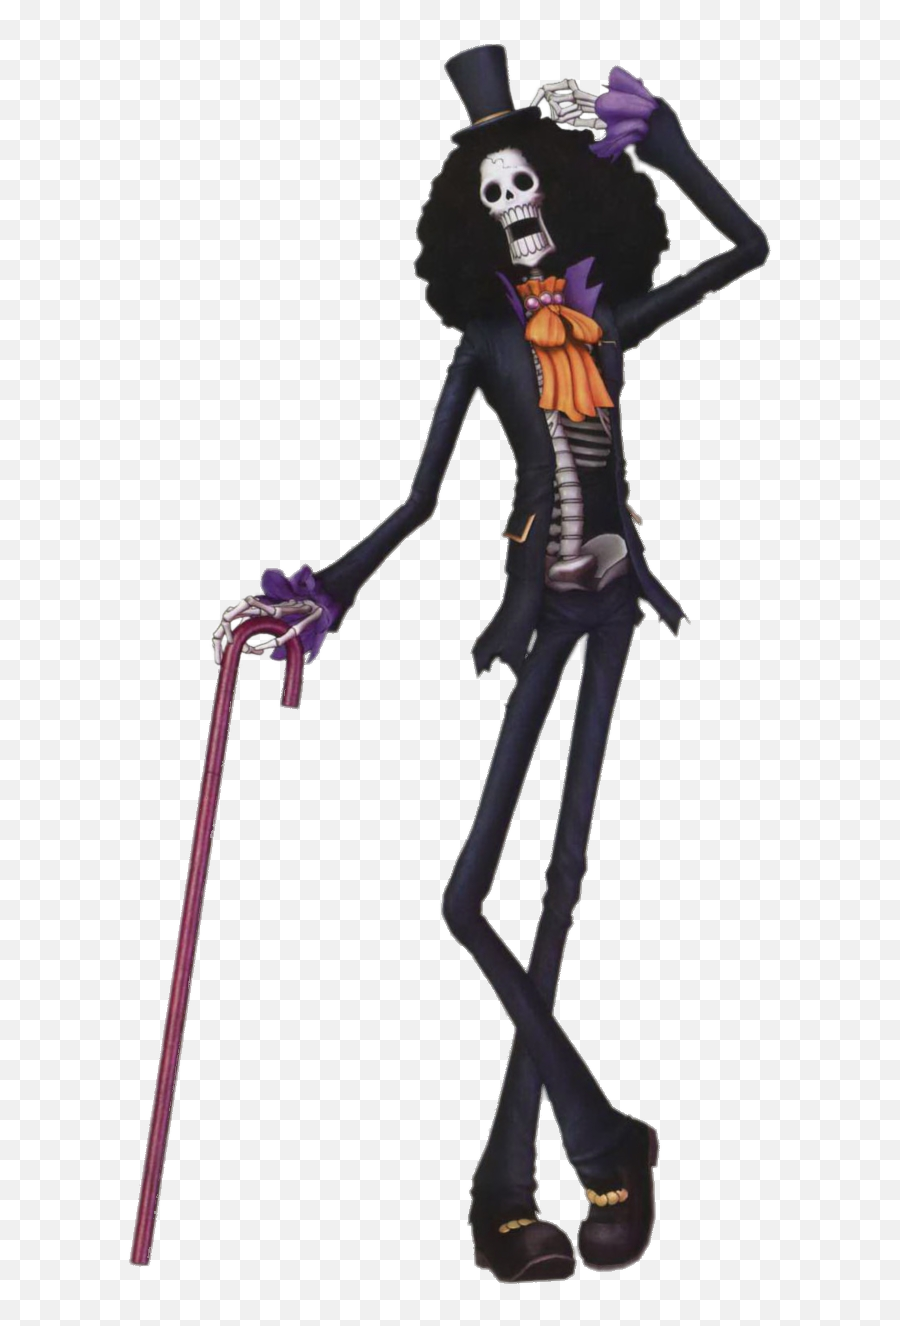 Piece Brook Holding Cane Png Image - Brook One Piece Png Emoji,Cane Png